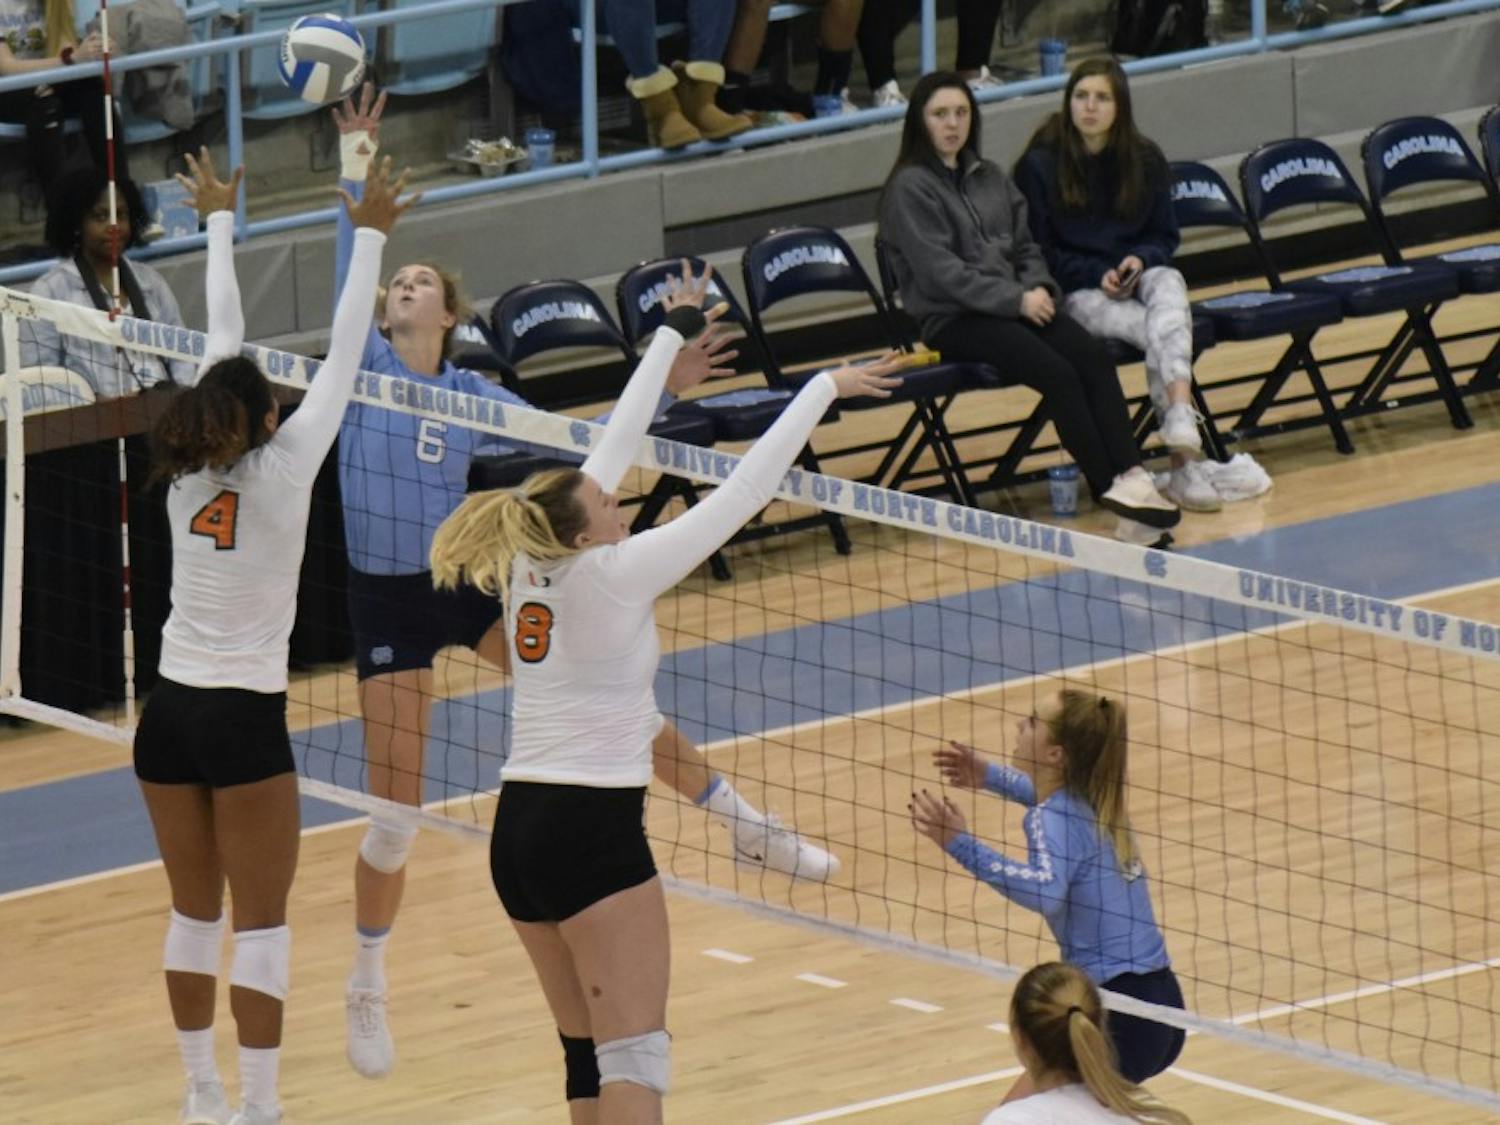 Junior Skylar Wine (6) tips the ball during the game against Miami on Sunday Oct. 11 at Carmichael Arena. UNC won 3-1.